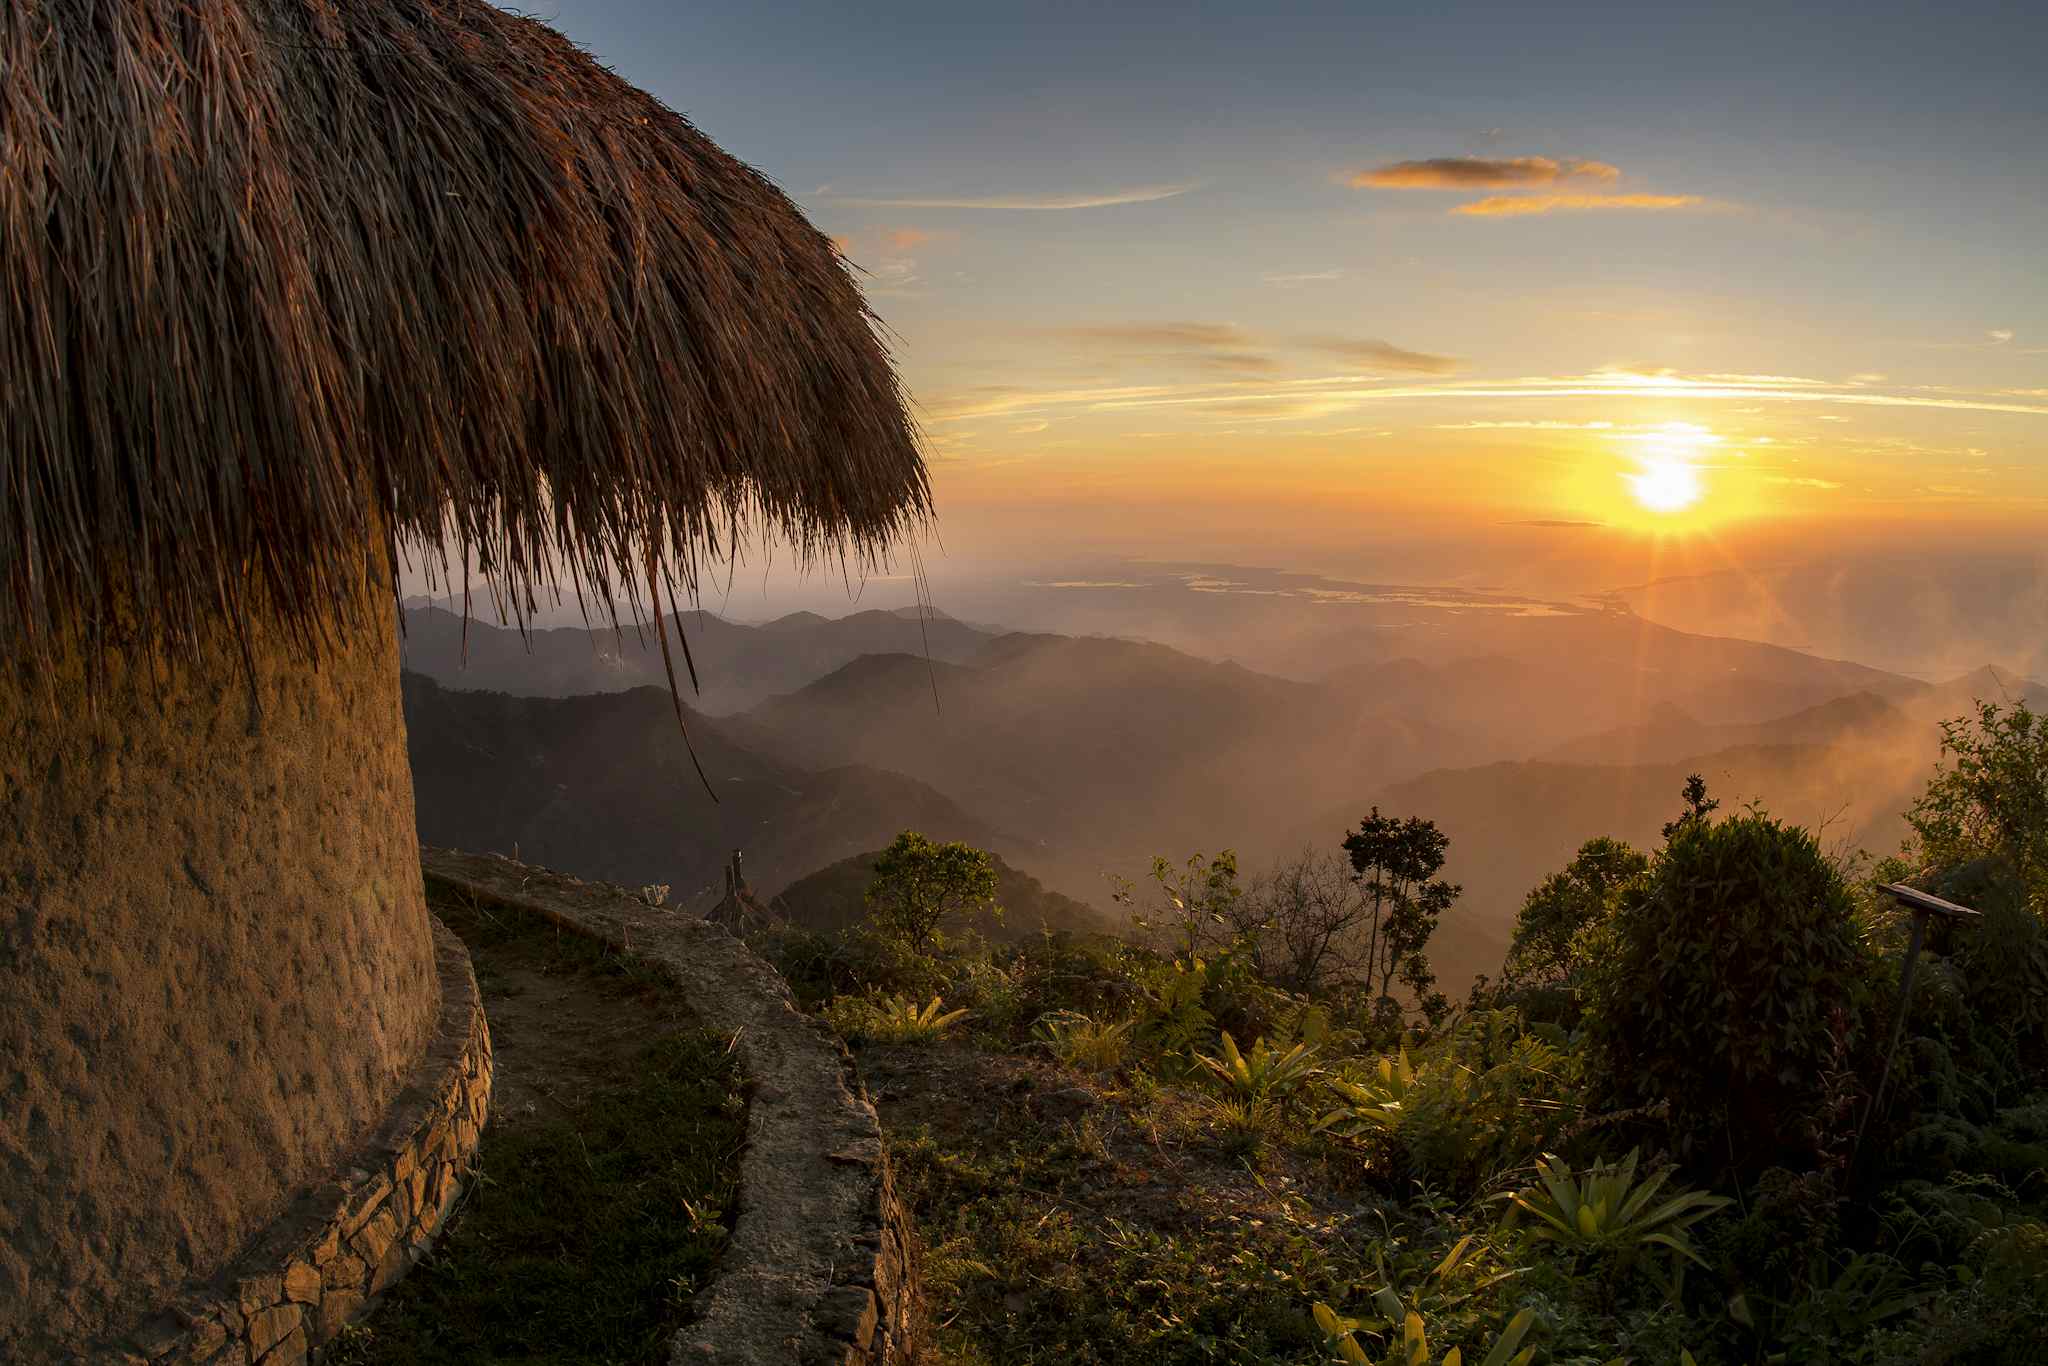 Trek Colombia’s Mountains and Lost City